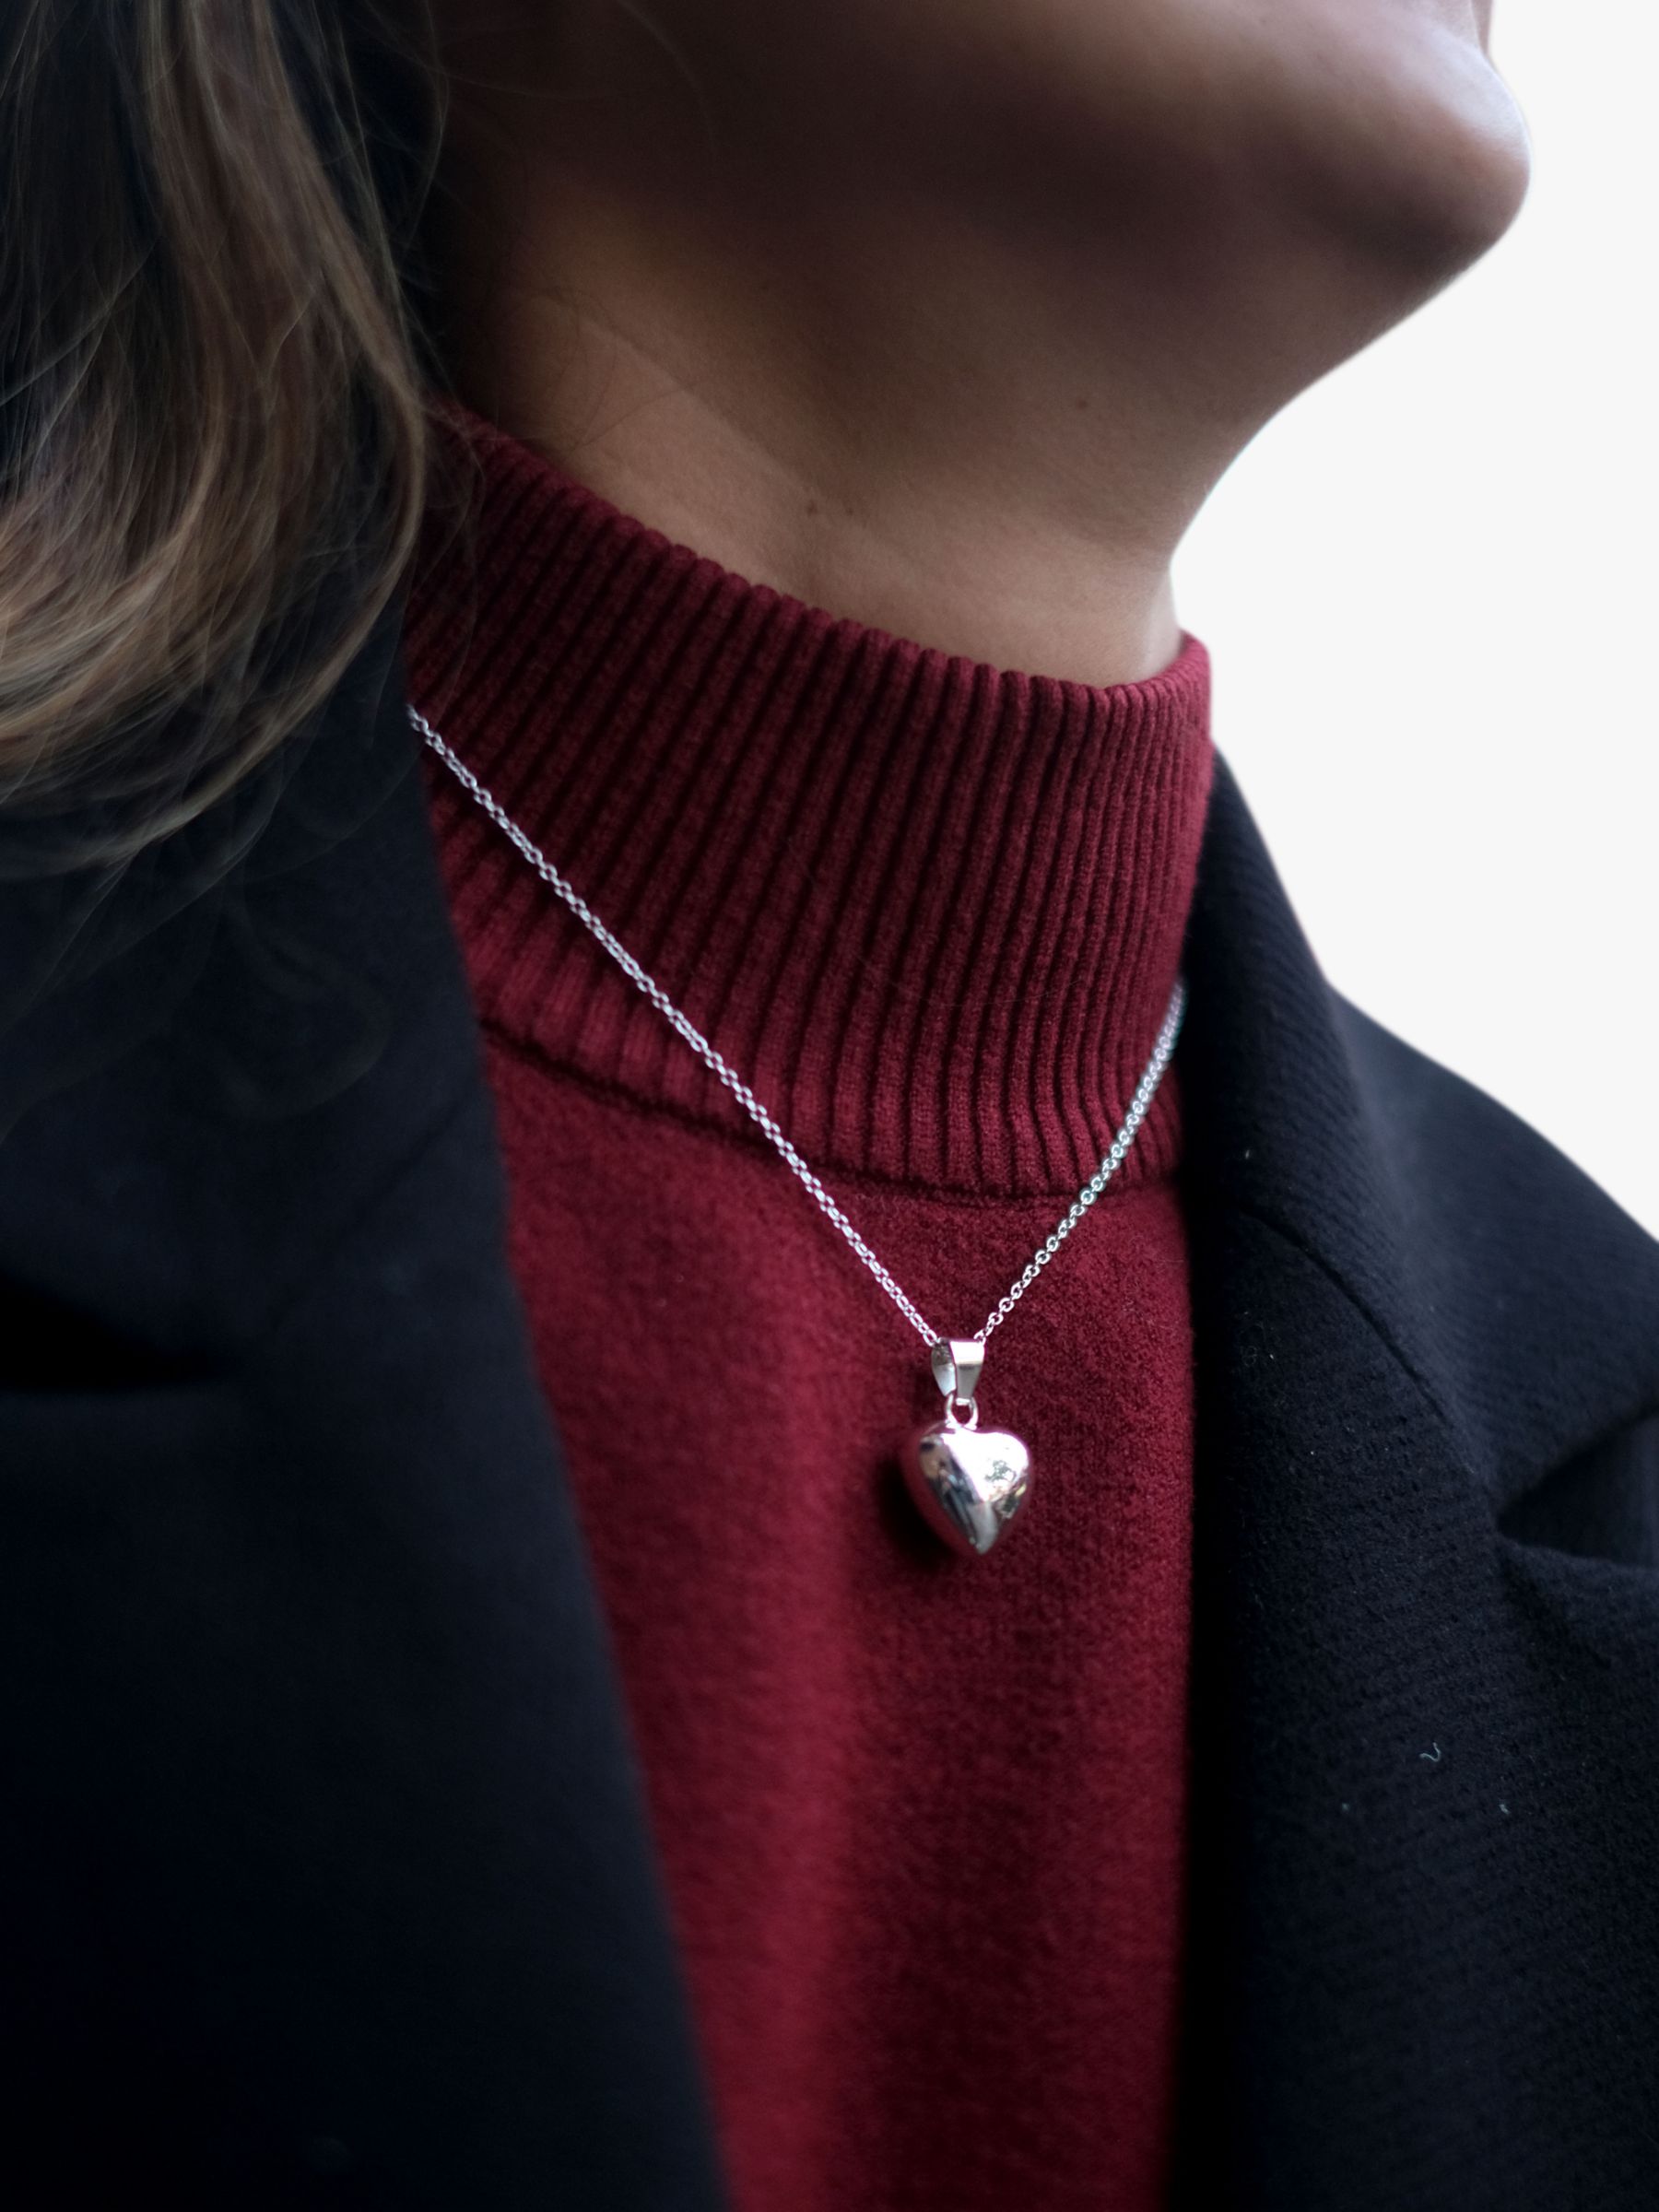 Buy Andea Puffed Heart Pendant Necklace, Silver Online at johnlewis.com